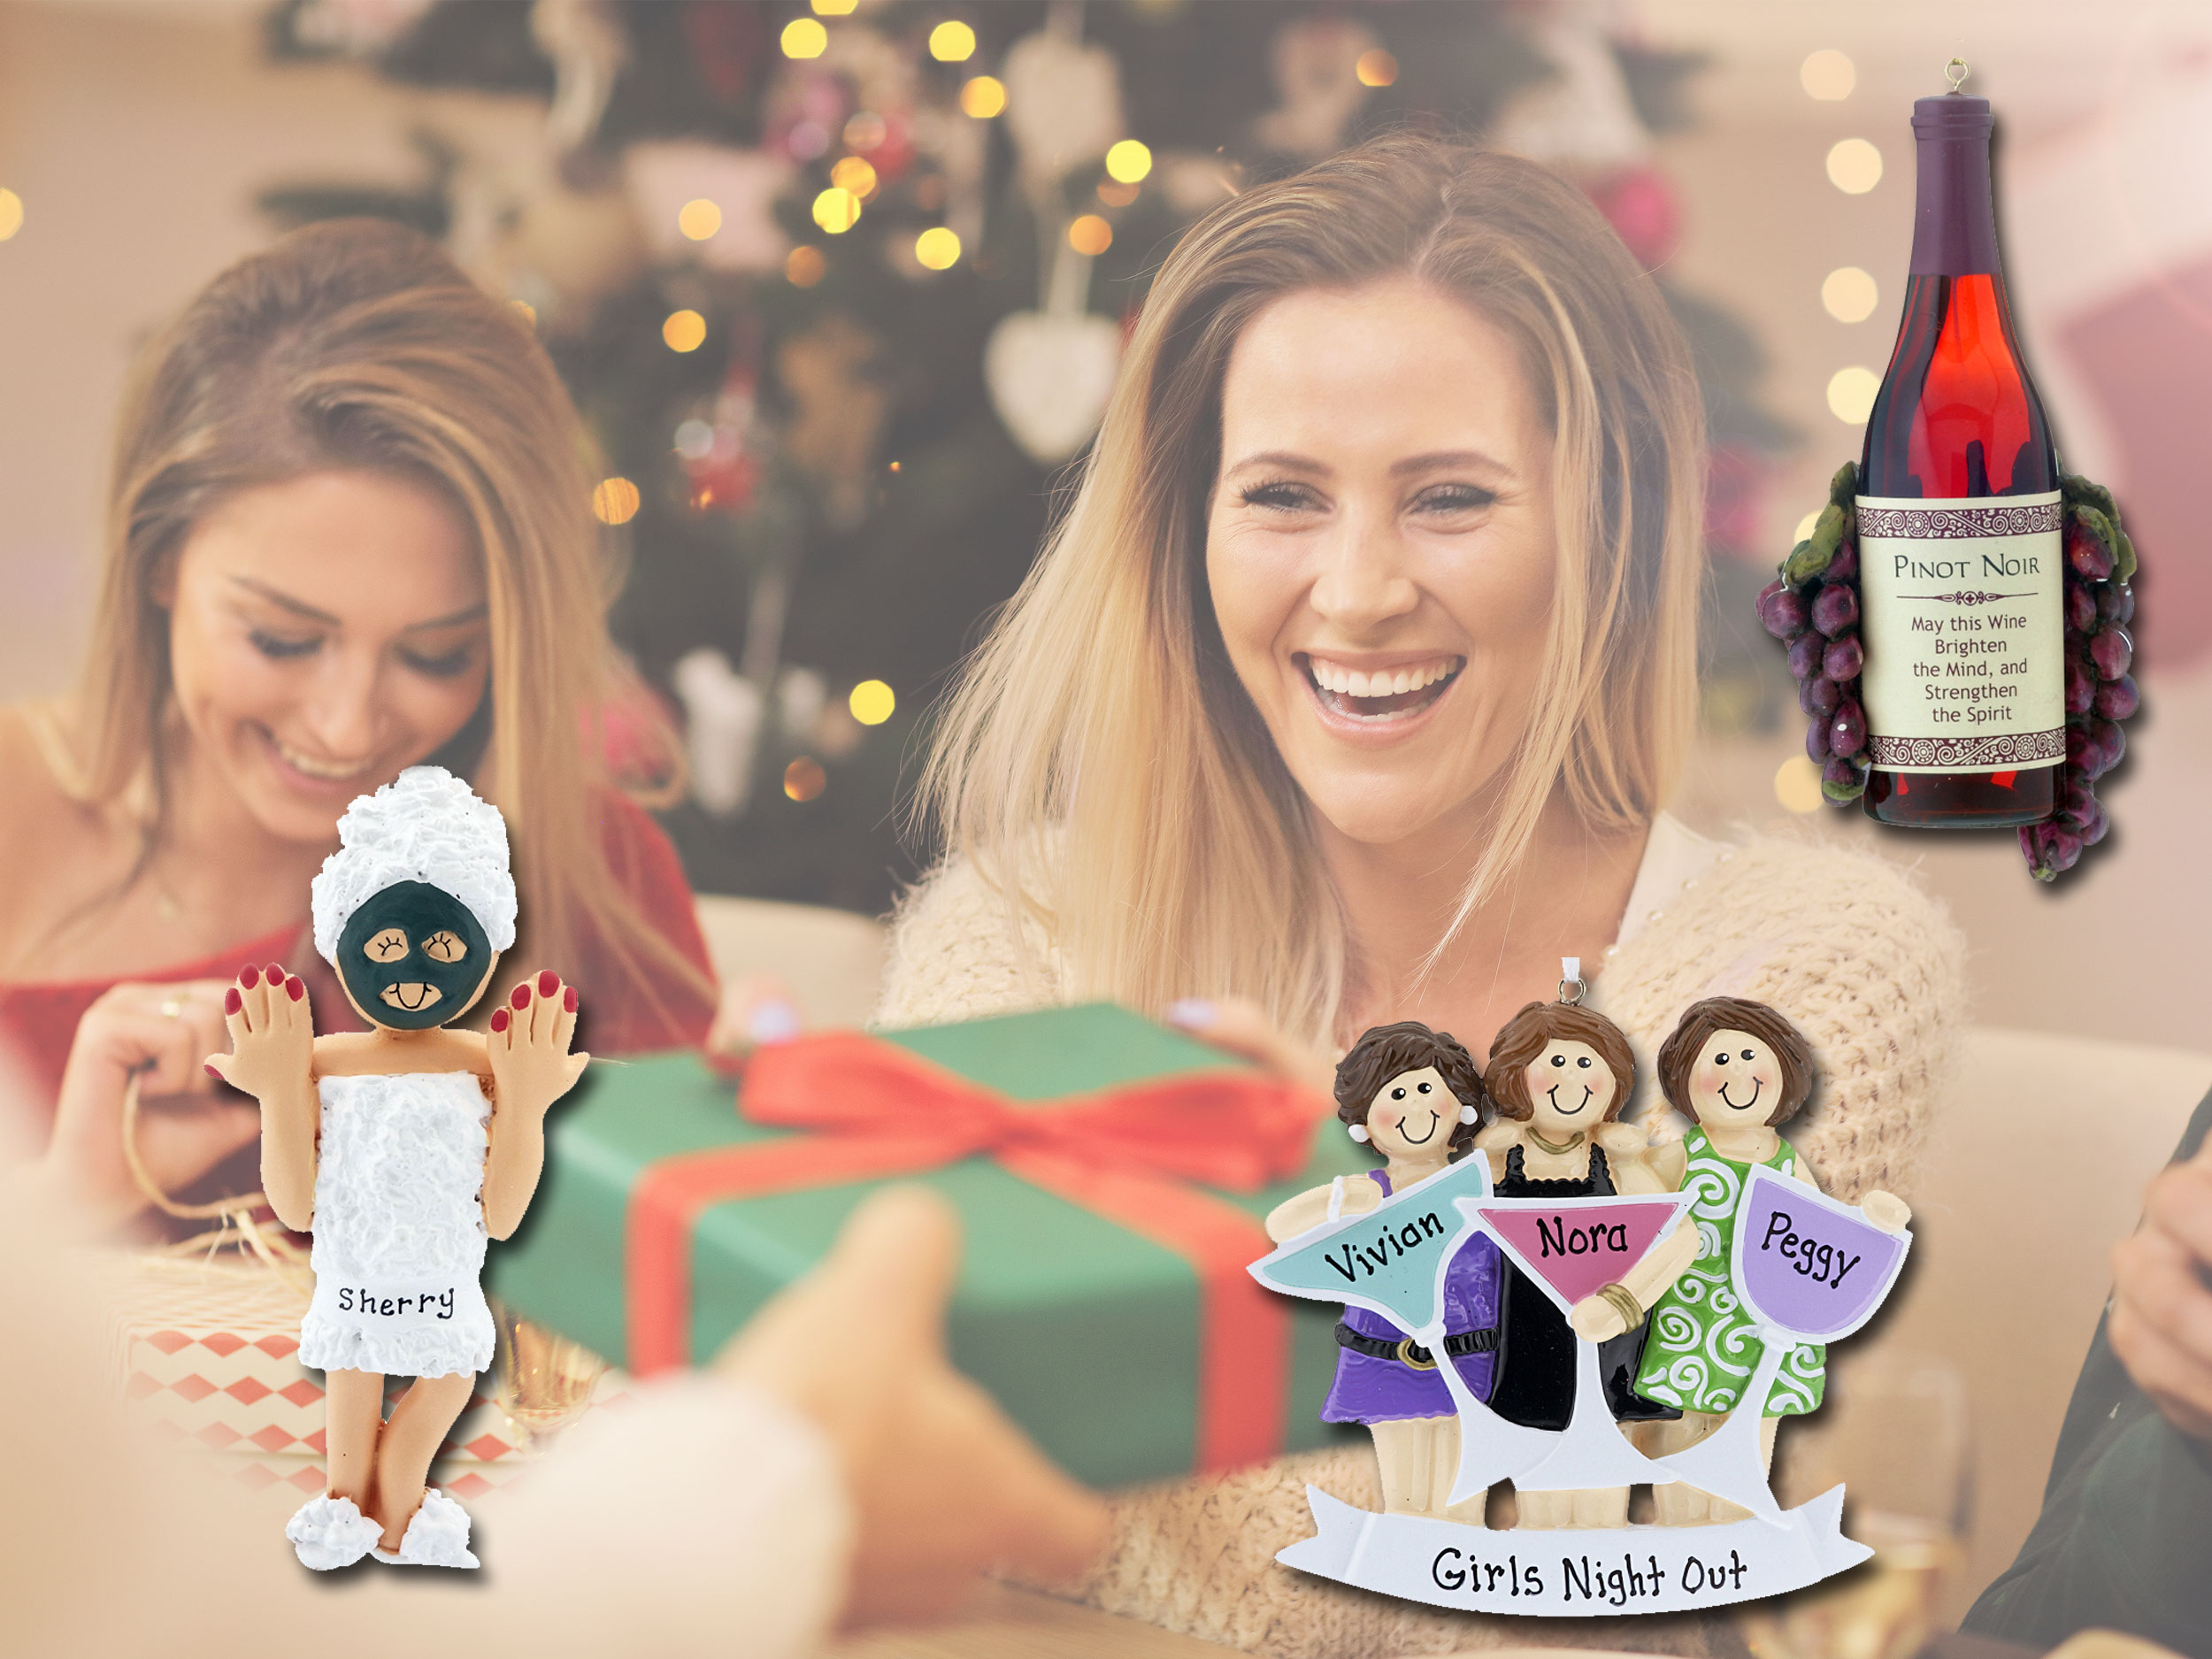 Find the best personalized ornaments for girlfriends to represent her unique hobbies, interests and your friendship. | OrnamentShop.com